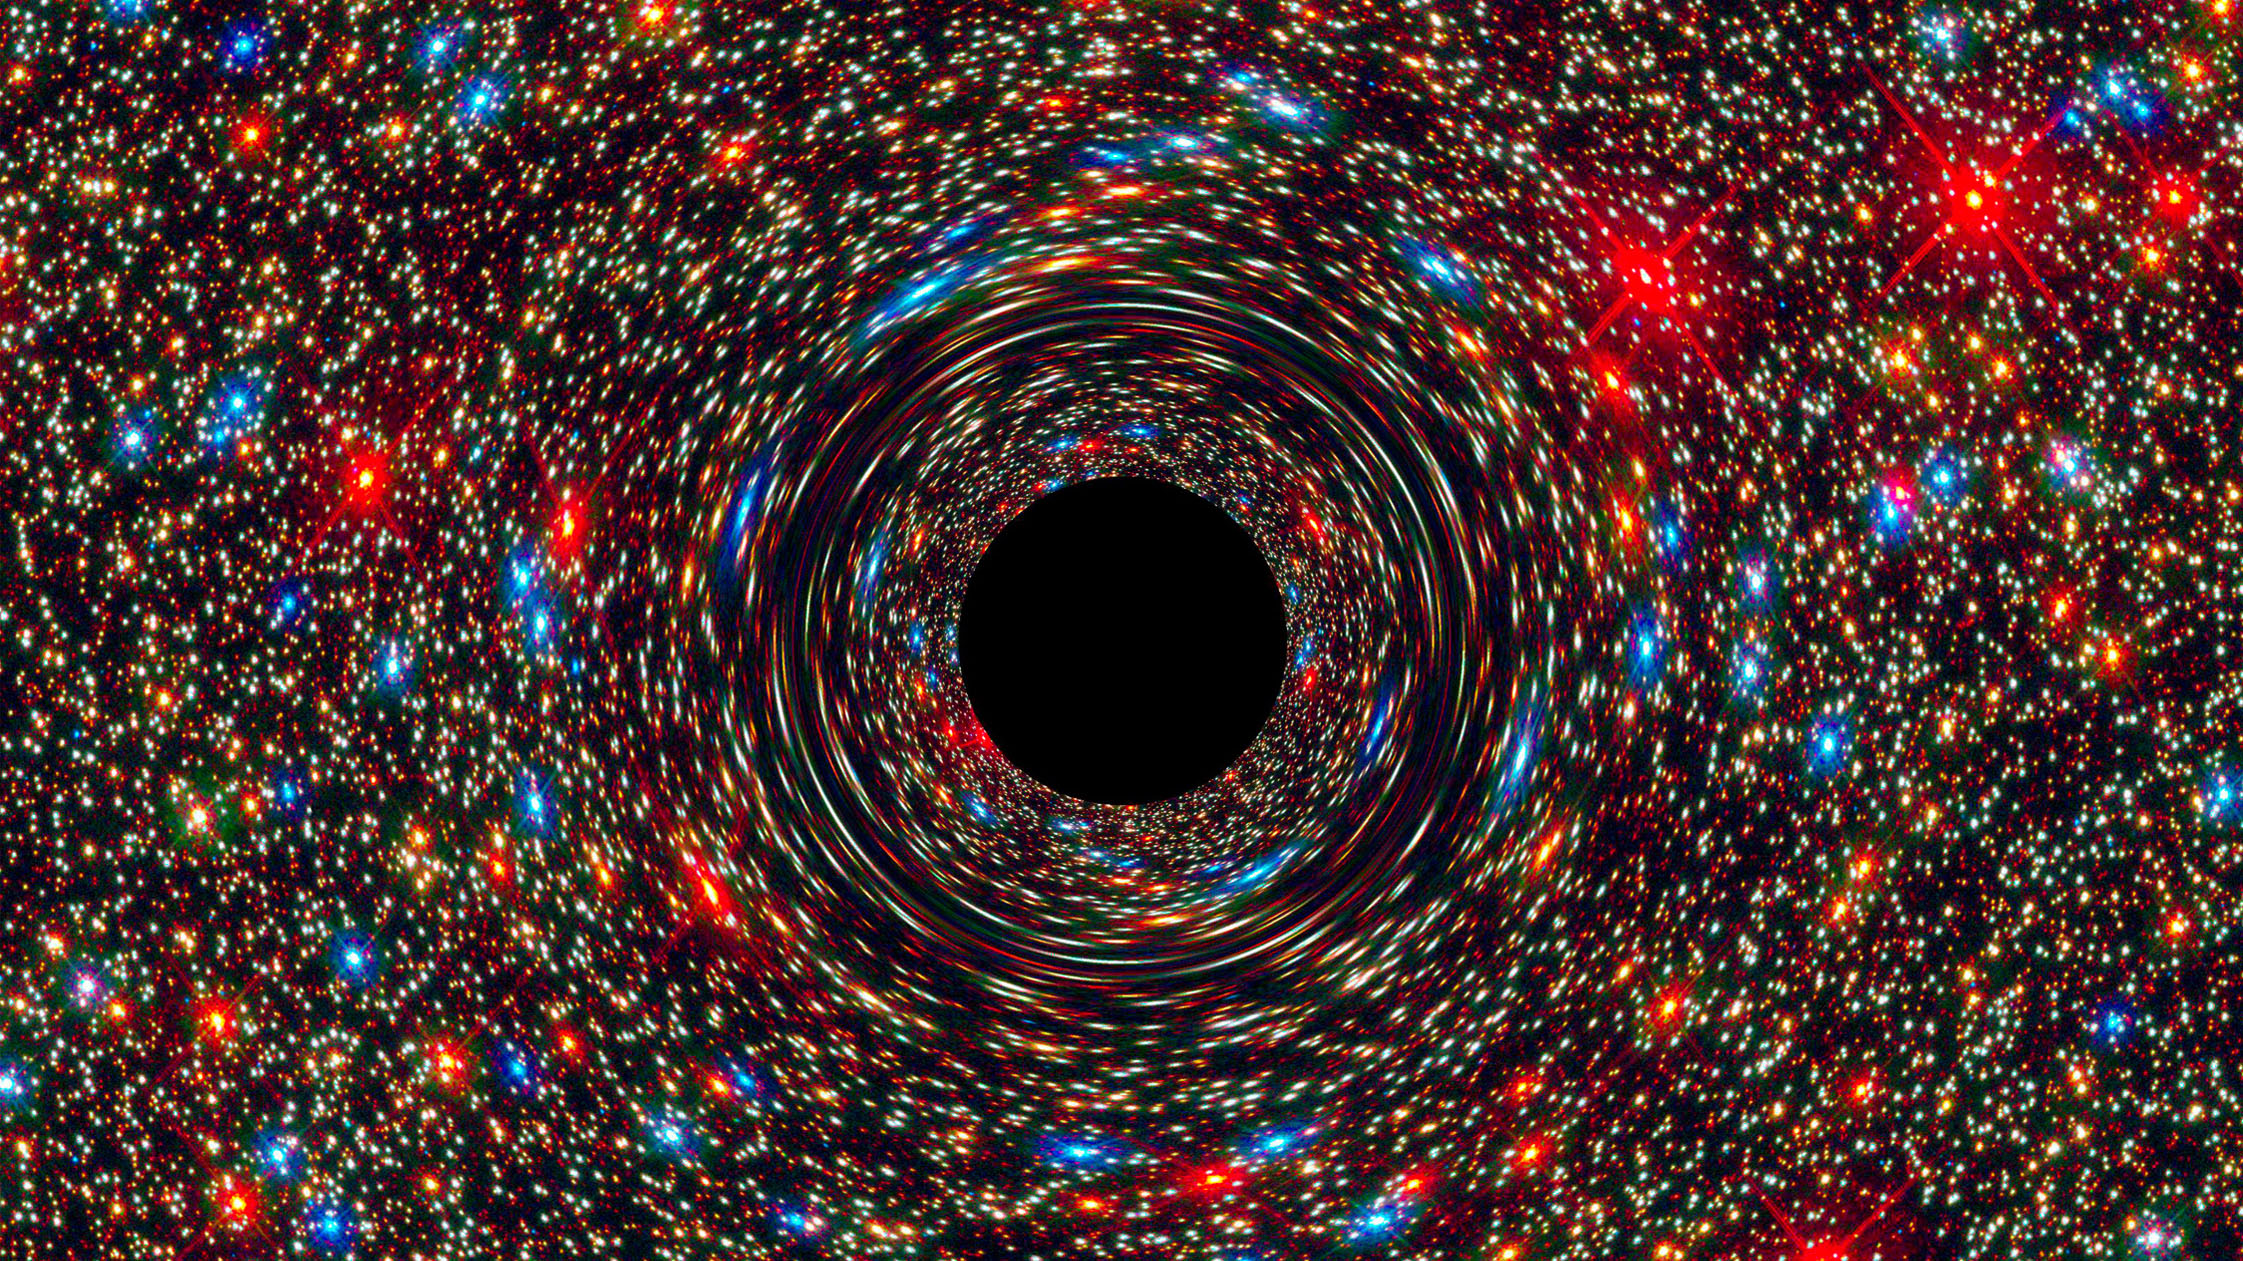 A computer-simulated image shows a supermassive black hole at the core of a galaxy.